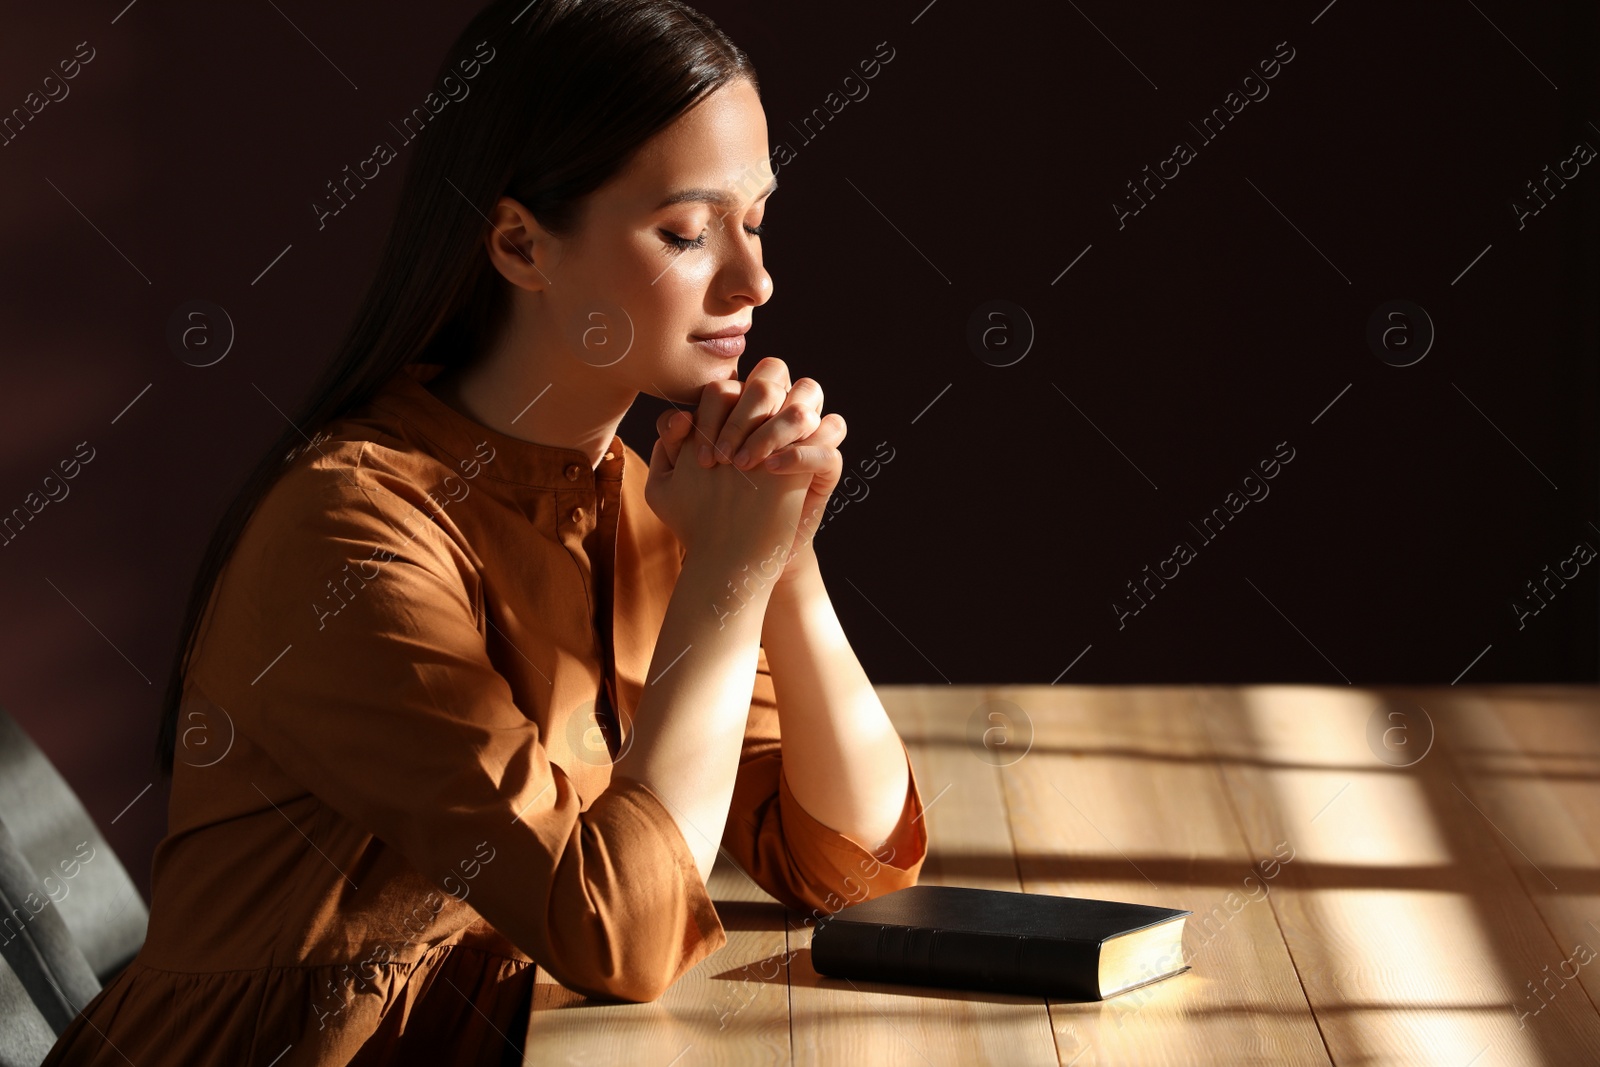 Photo of Religious young woman praying over Bible at table indoors